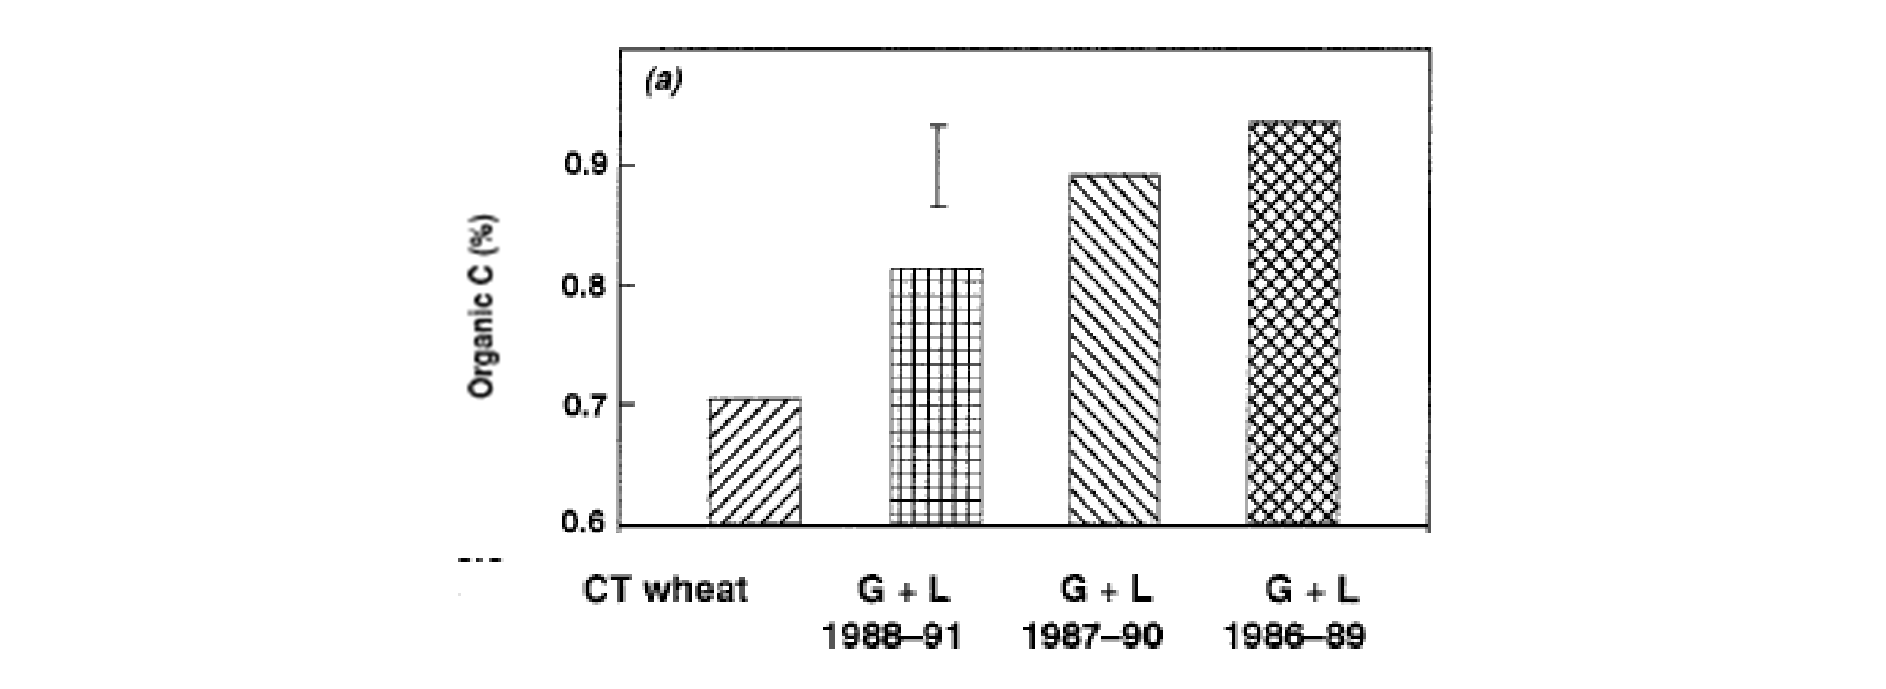 Figure 5 is a column graph which shows the soil OC concentration in May 1989 after continuous conventional till wheat, and after grass+legume pasture commencing 1988, 1987 or 1986 (0-2.5cm). Source: Dalal and Chan 2001.